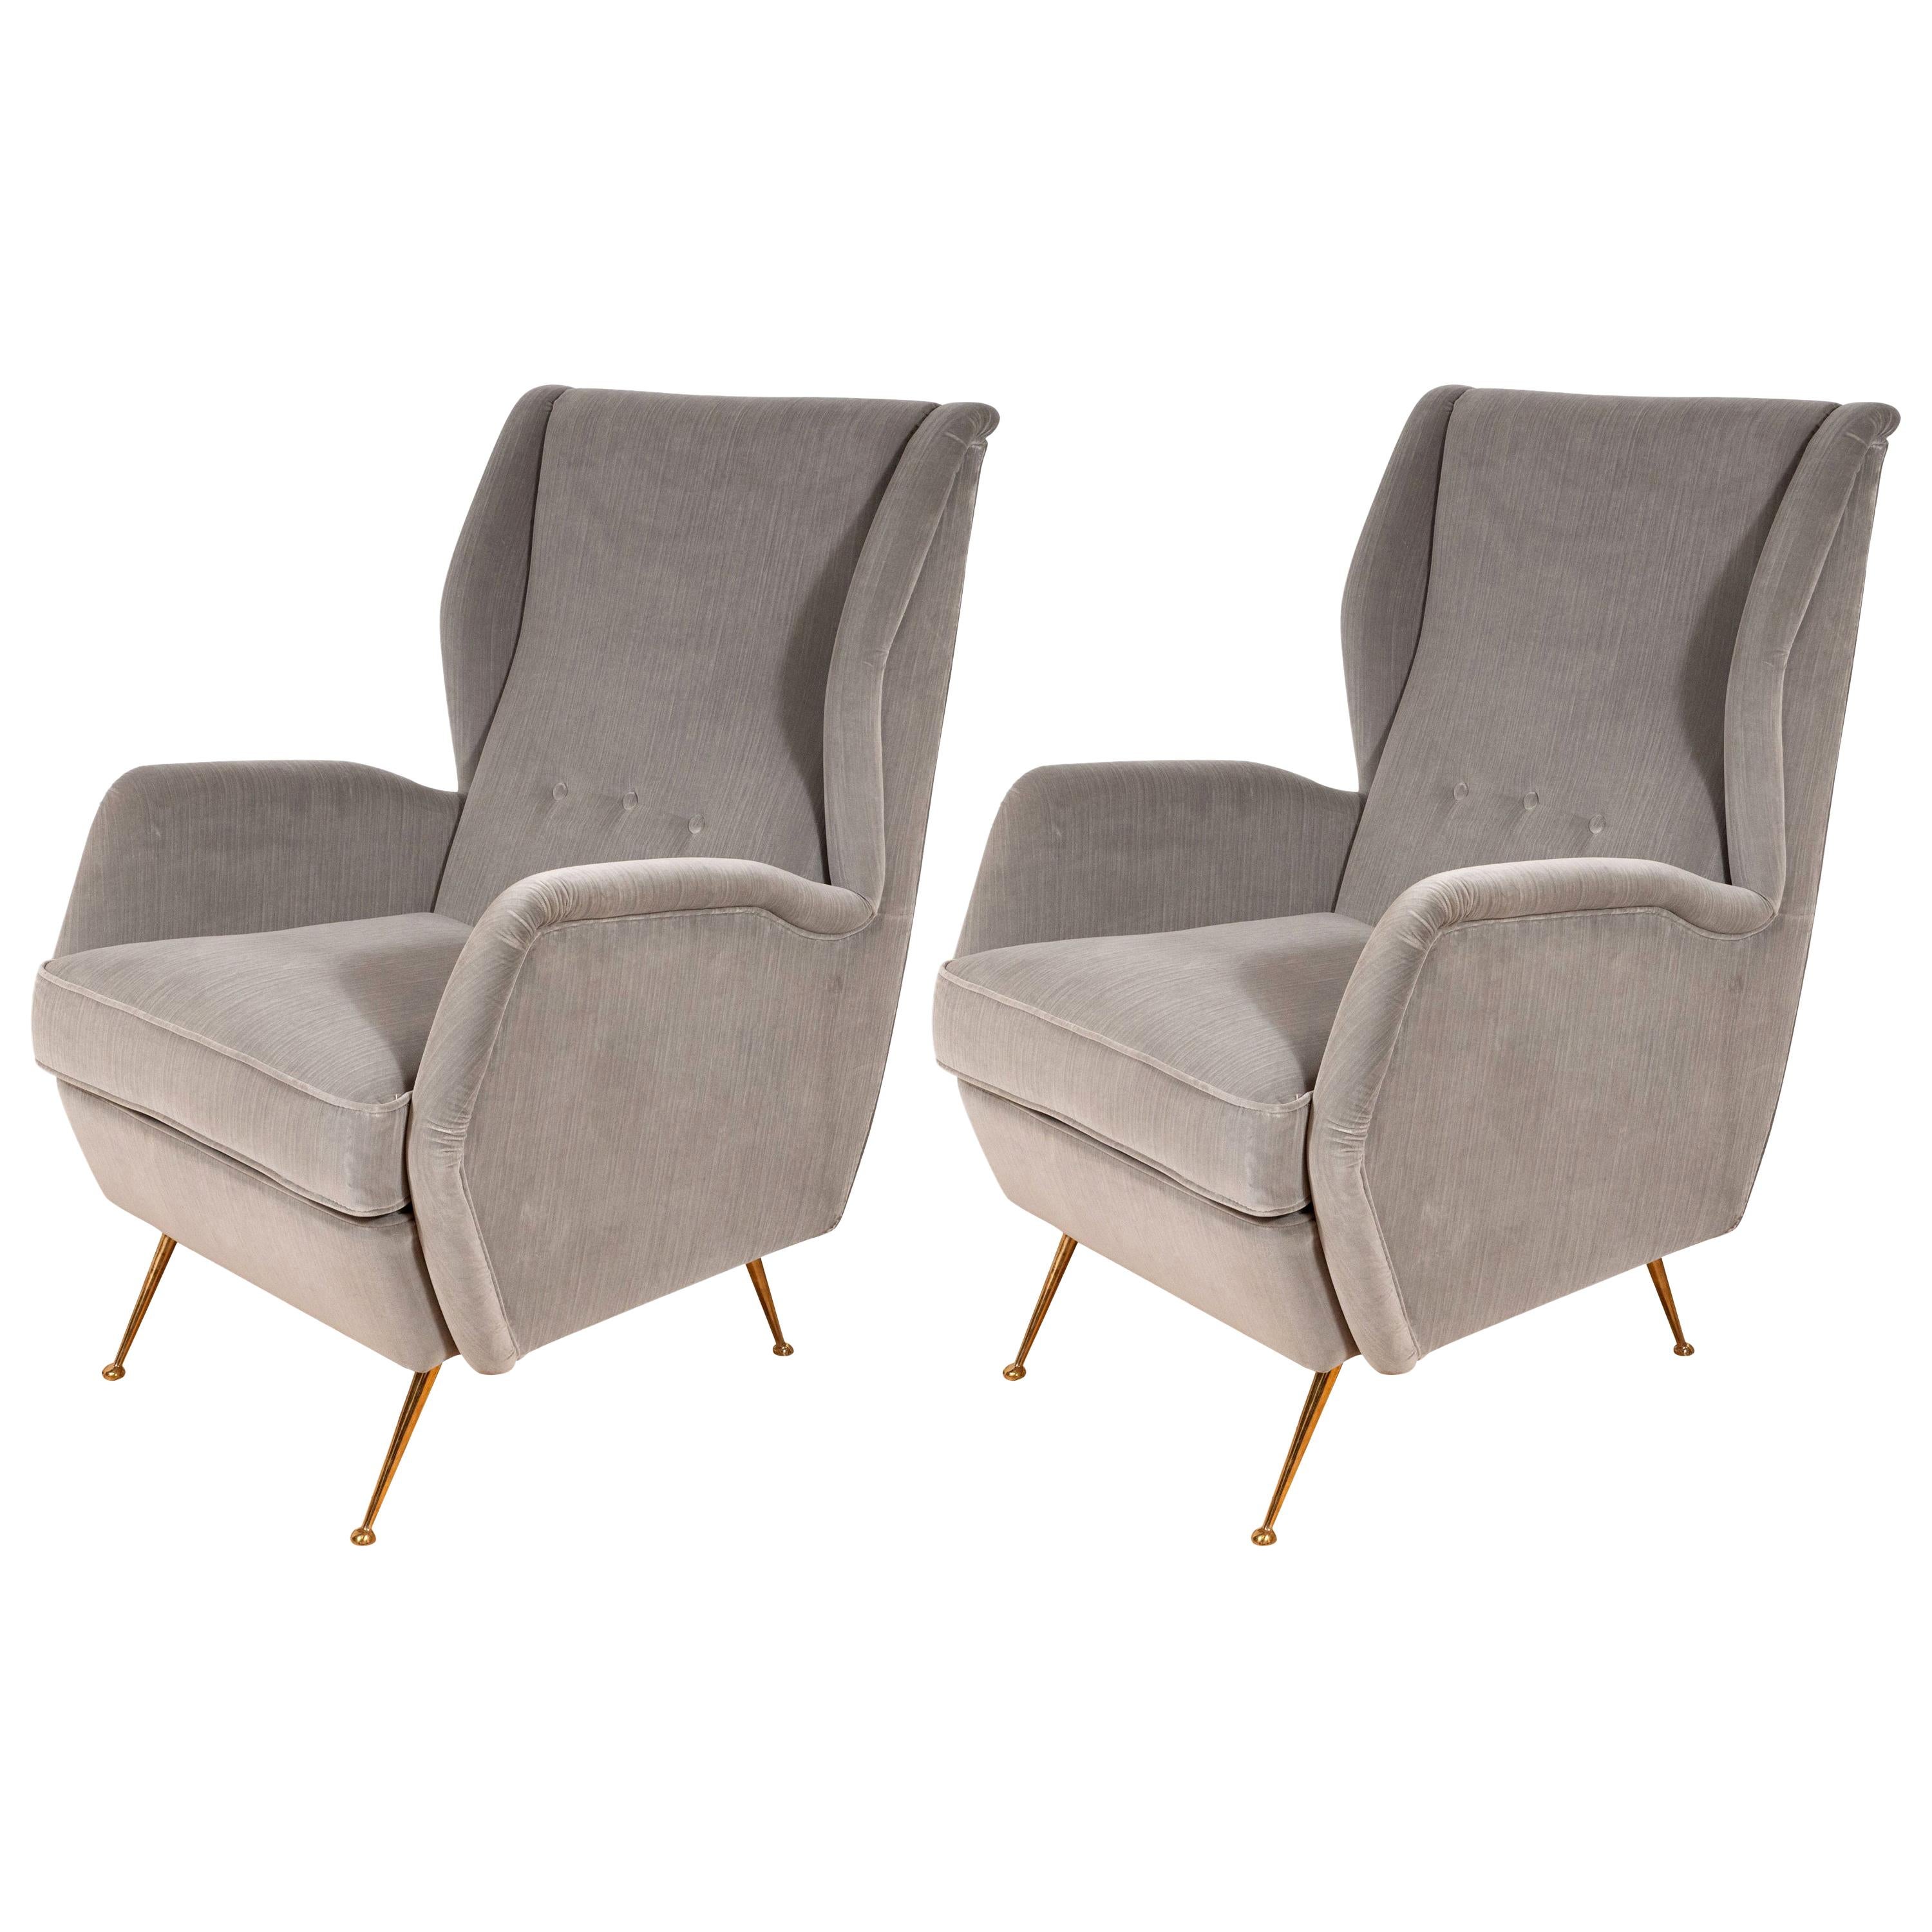 Pair of Custom Made to Order Sculptural Lounge Chairs in Grey Velvet, Italy